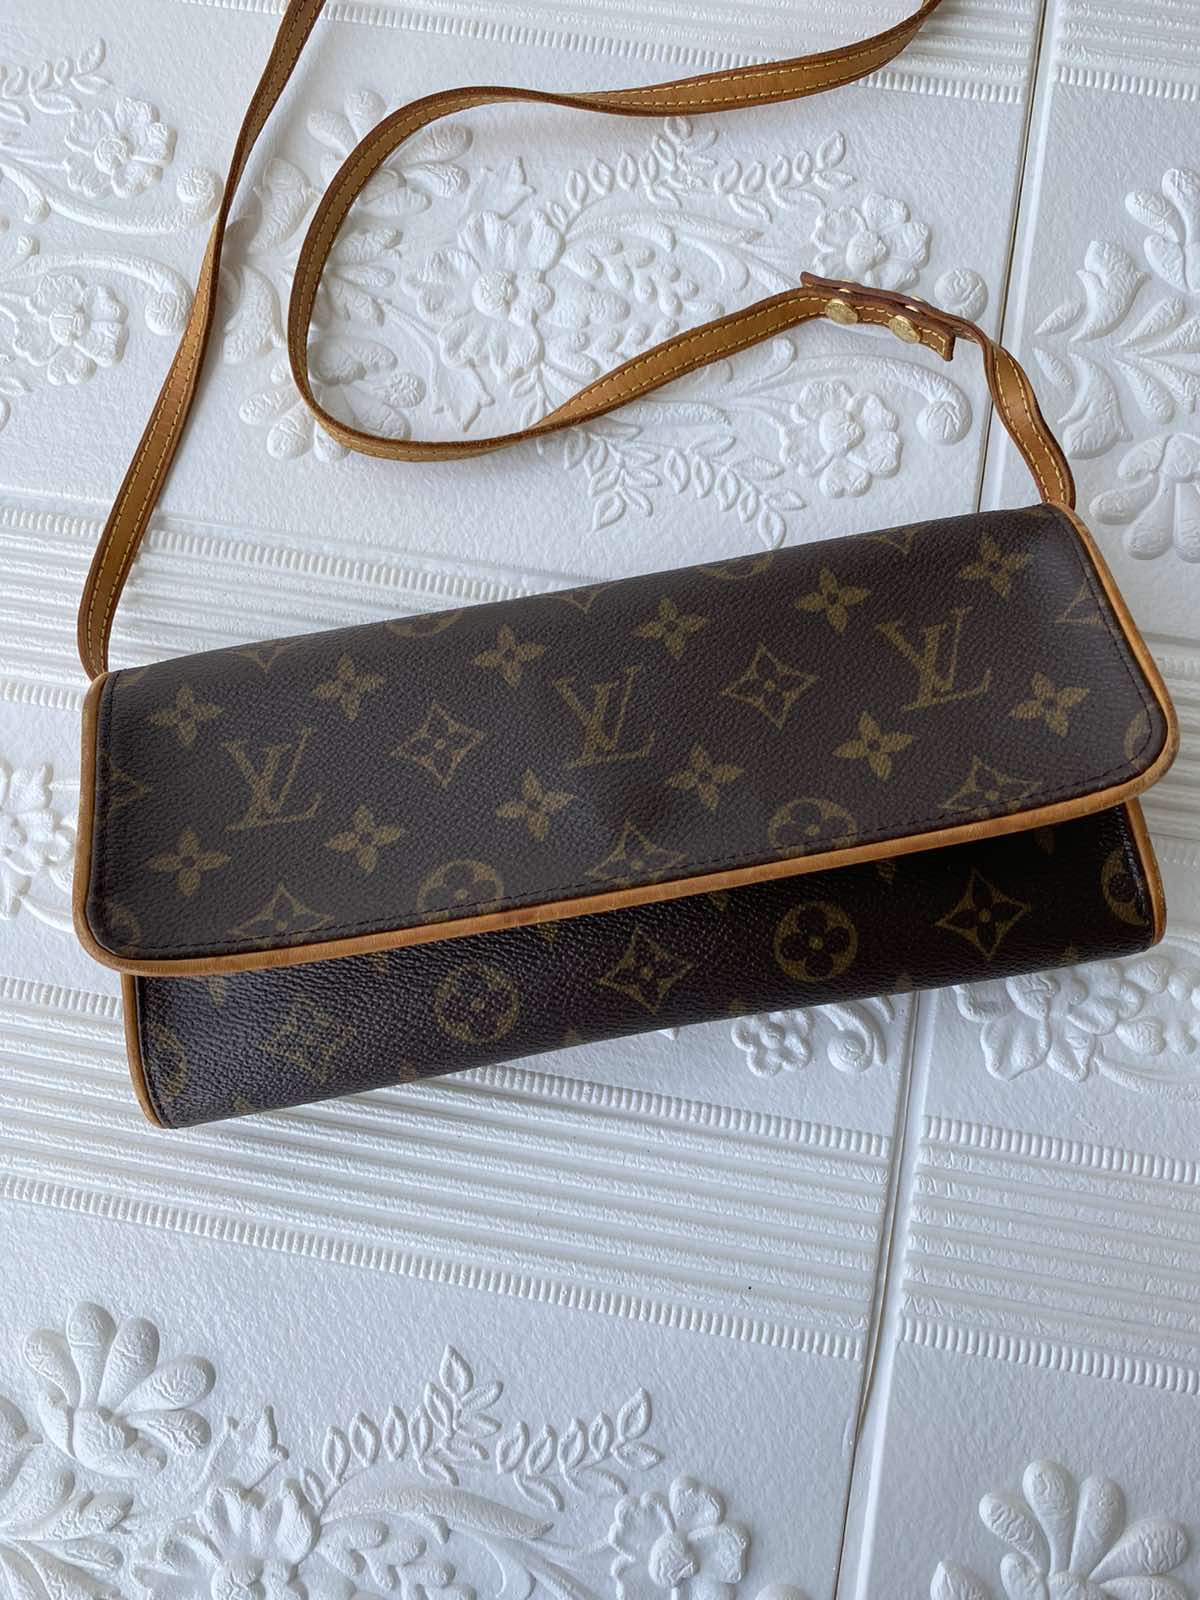 How to spot a FAKE and AUTHENTIC LOUIS VUITTON bag? - Love Cynthia - The  Blog